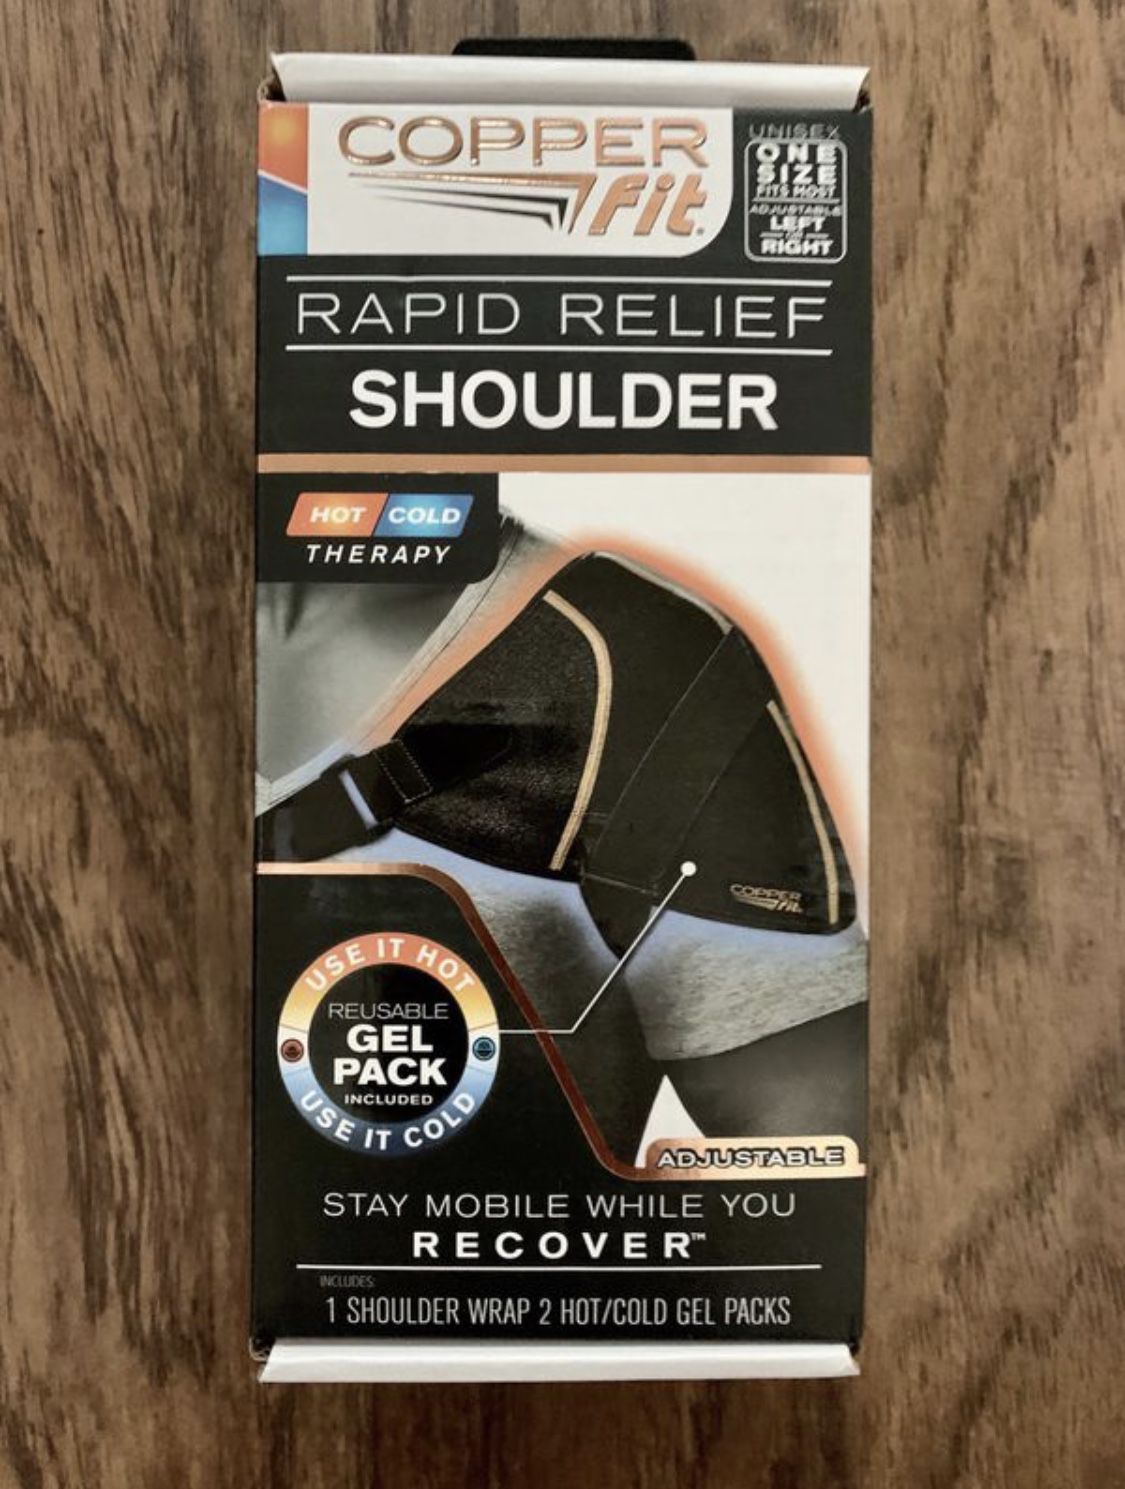 New in Box Copper Fit Rapid Relief Shoulder Wrap and Gel Pack for